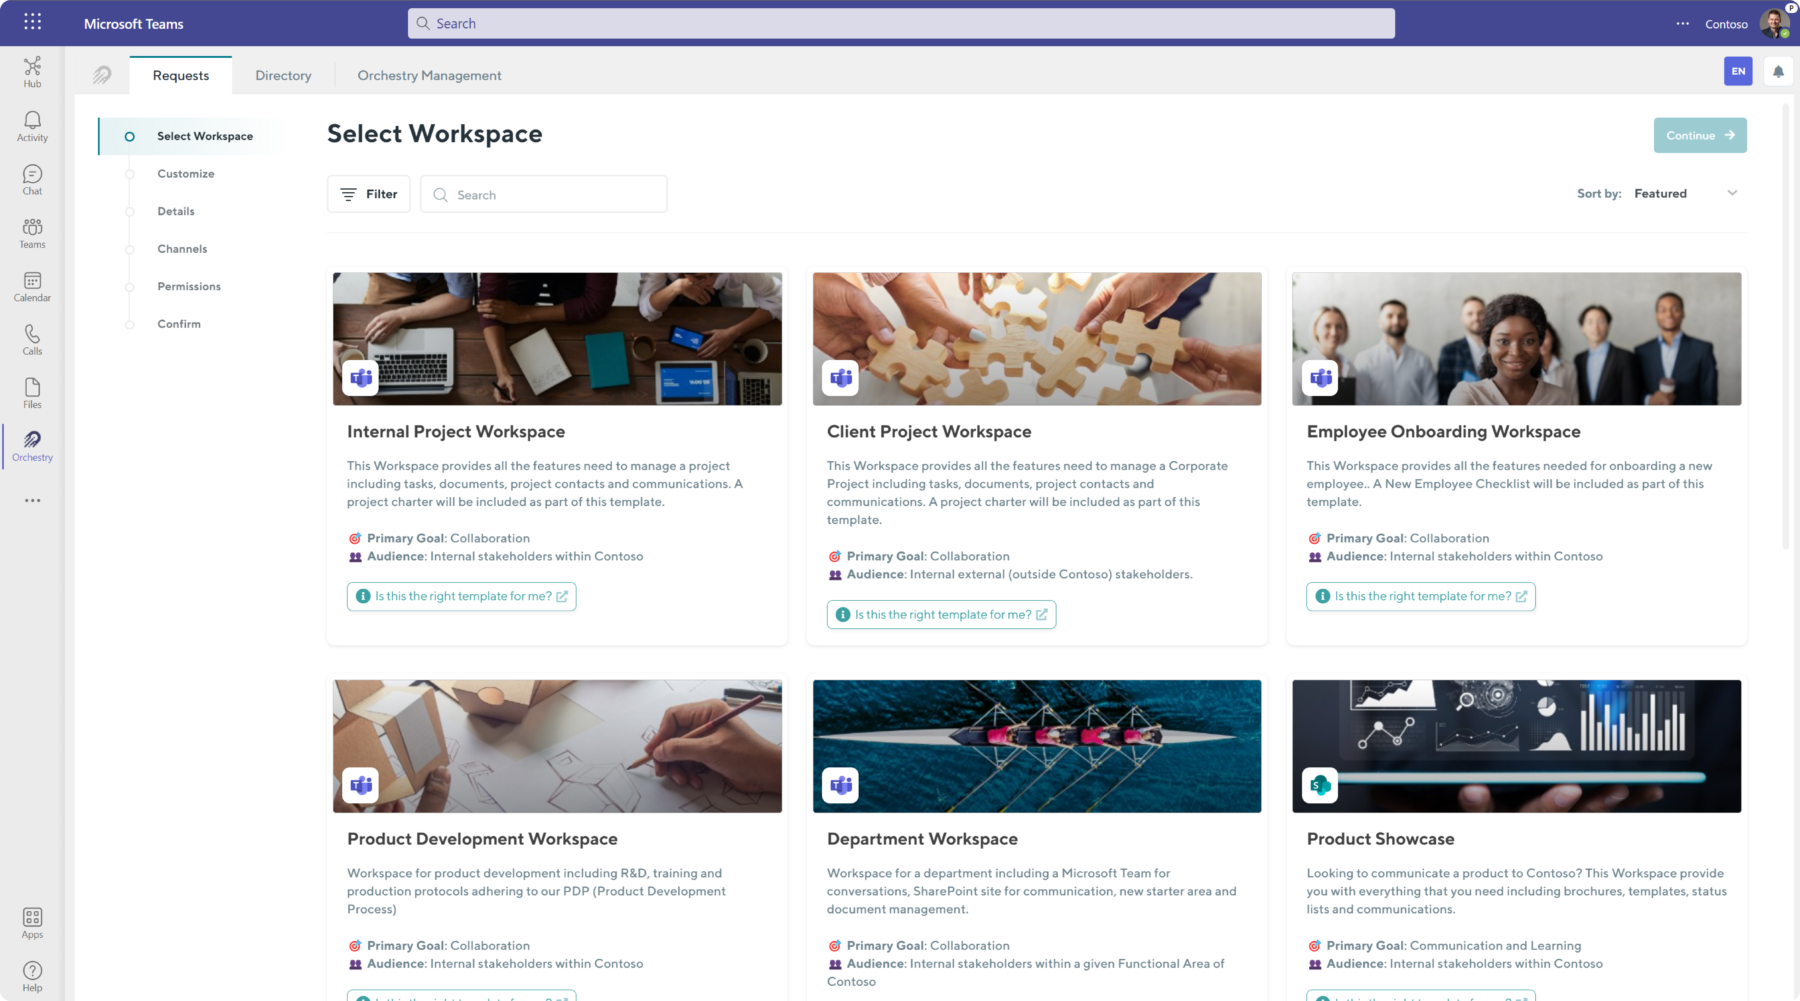 Orchestry's SharePoint and Microsoft Teams templates library